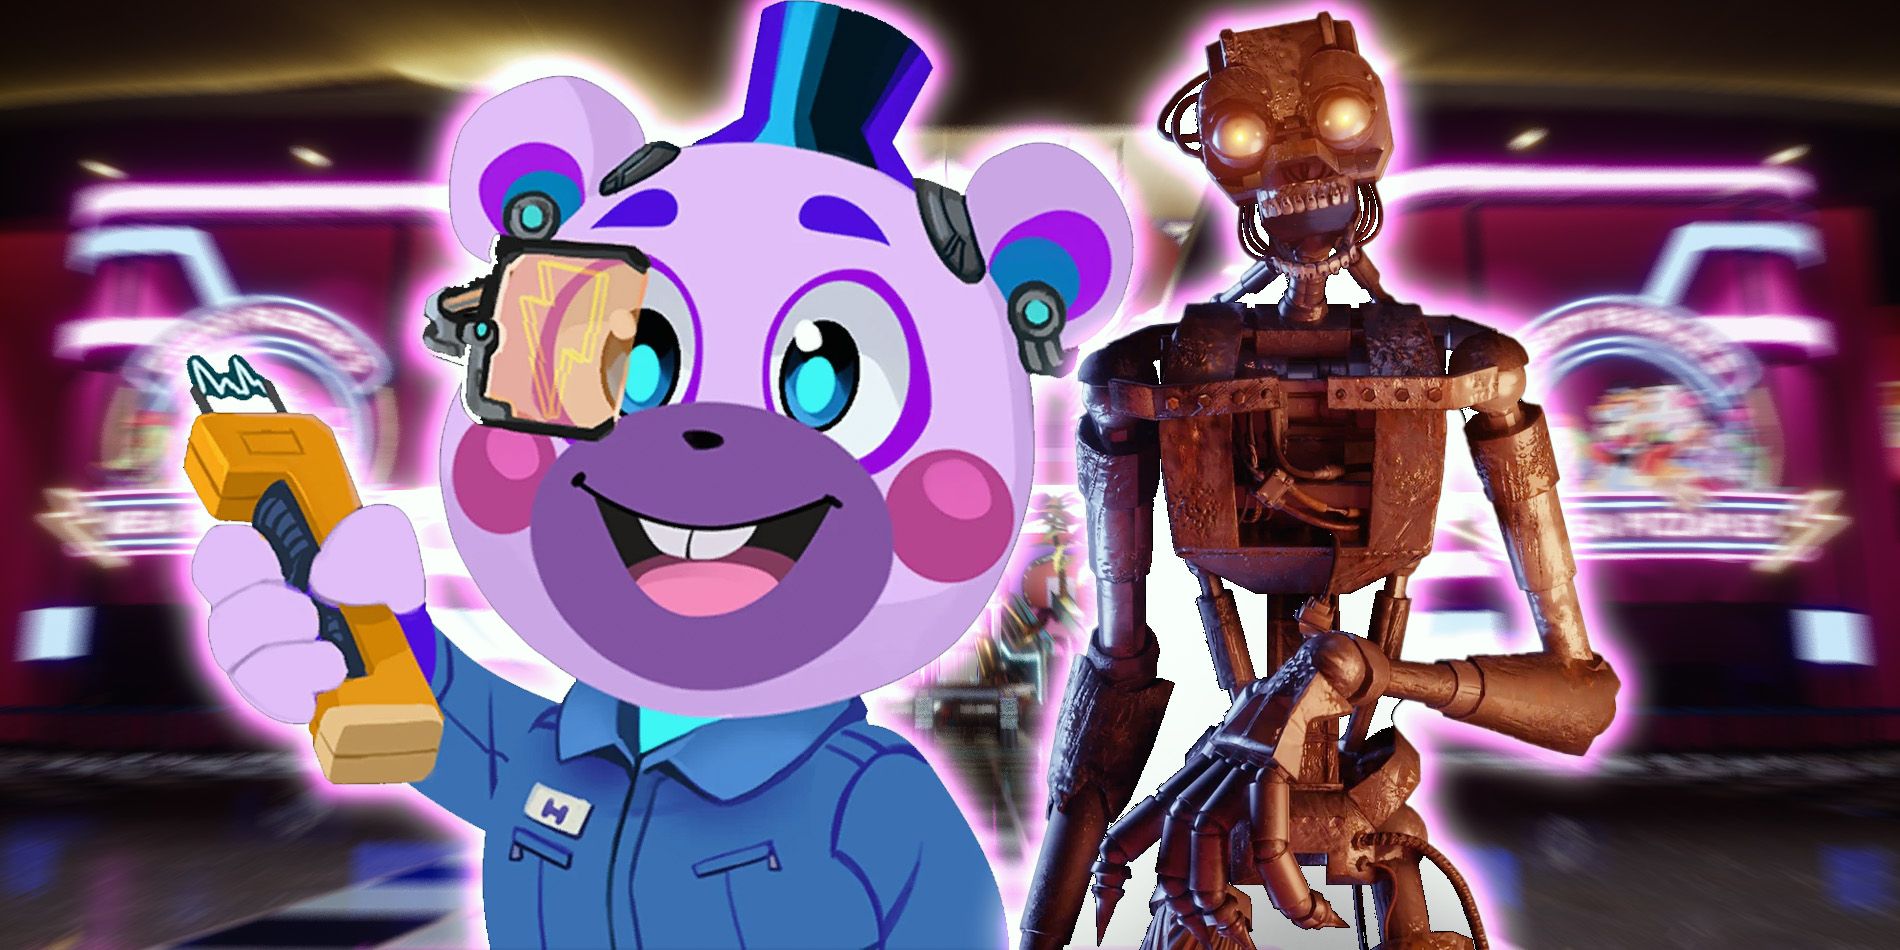 FNAF: Security Breach Ruin DLC - What Is The Mimic & Who Is Helpi?